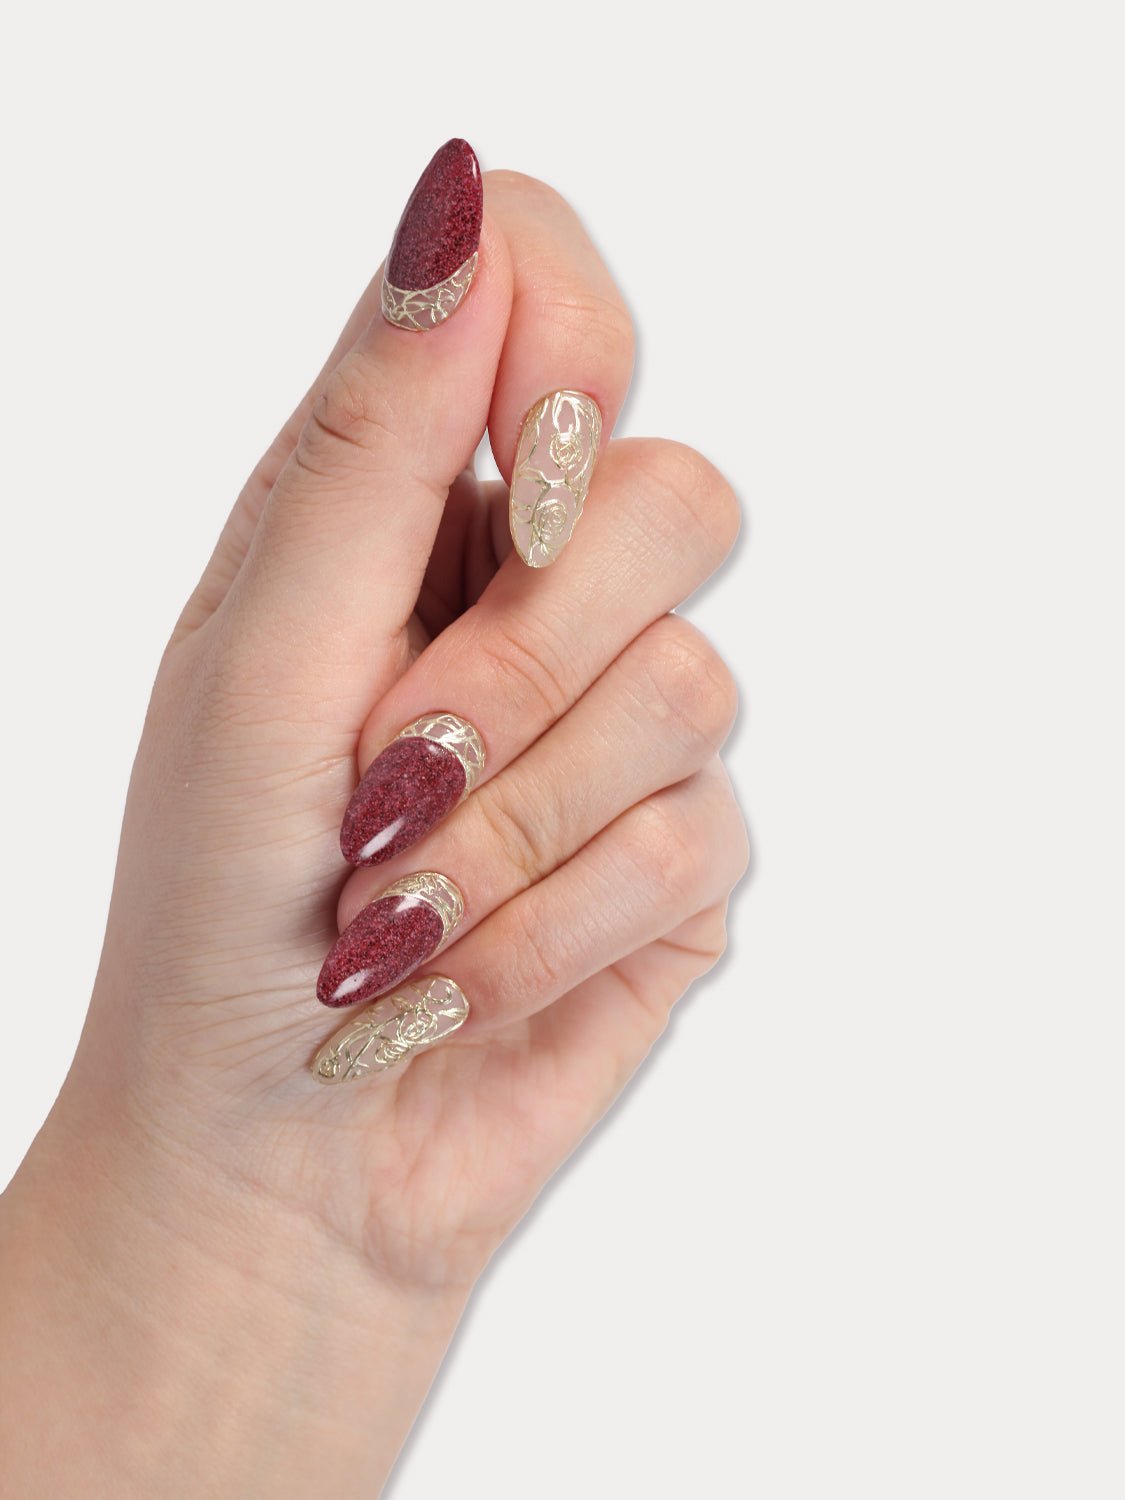 MIEAP Red Palace press on nails features intricate gold floral carvings and a red stone texture gel. The design showcases impeccable craftsmanship, while the stone texture exudes a sense of opulence and grandeur, reminiscent of a bygone era’s magnificence and sophistication. #MIEAP #MIEAPnails #pressonnail #falsenail #acrylicnail #nails #nailart #naildesign #nailinspo #handmadenail #autumnnail #nail2023 #graduationnail #shortnail #rednail #floralnail #datingnail #promnail